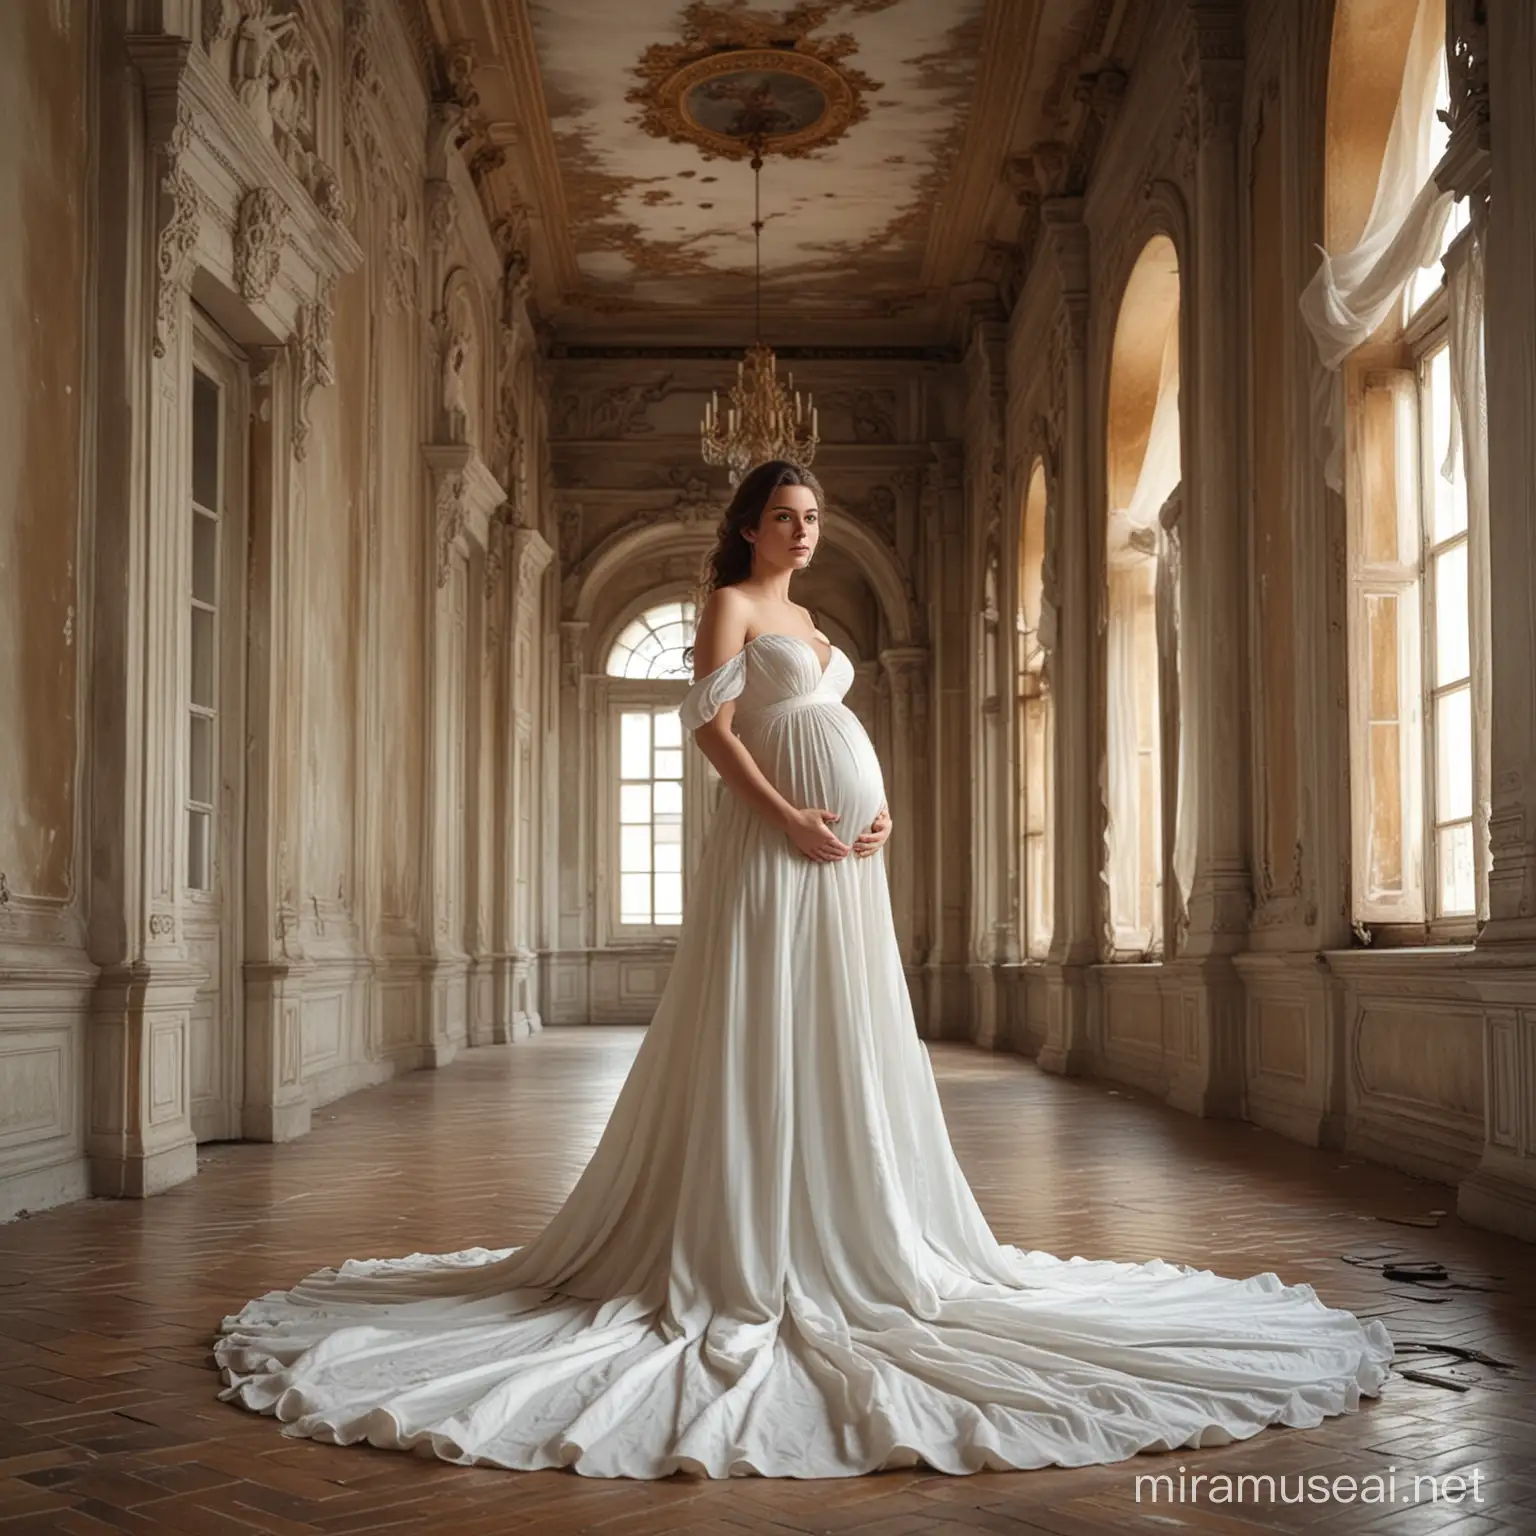 a beautiful pregnant woman in a white dress from the romantic era posing full length in the middle of a room in a half-abandoned baroque palace, with the train of the dress rising from the wind that comes through the windows, hyper-realistic style